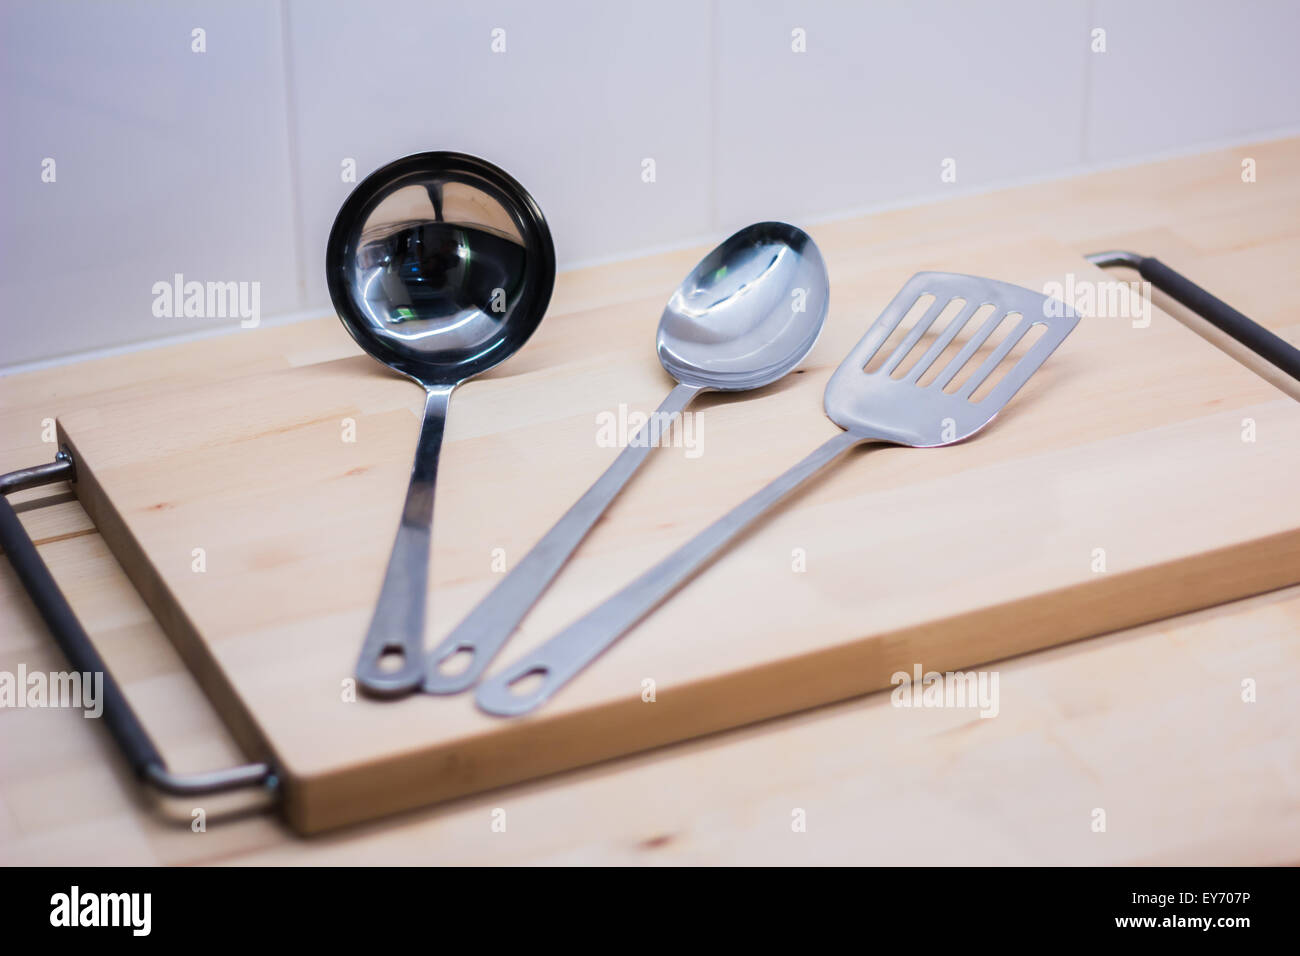 Stainless kitchenware on wooden board Stock Photo